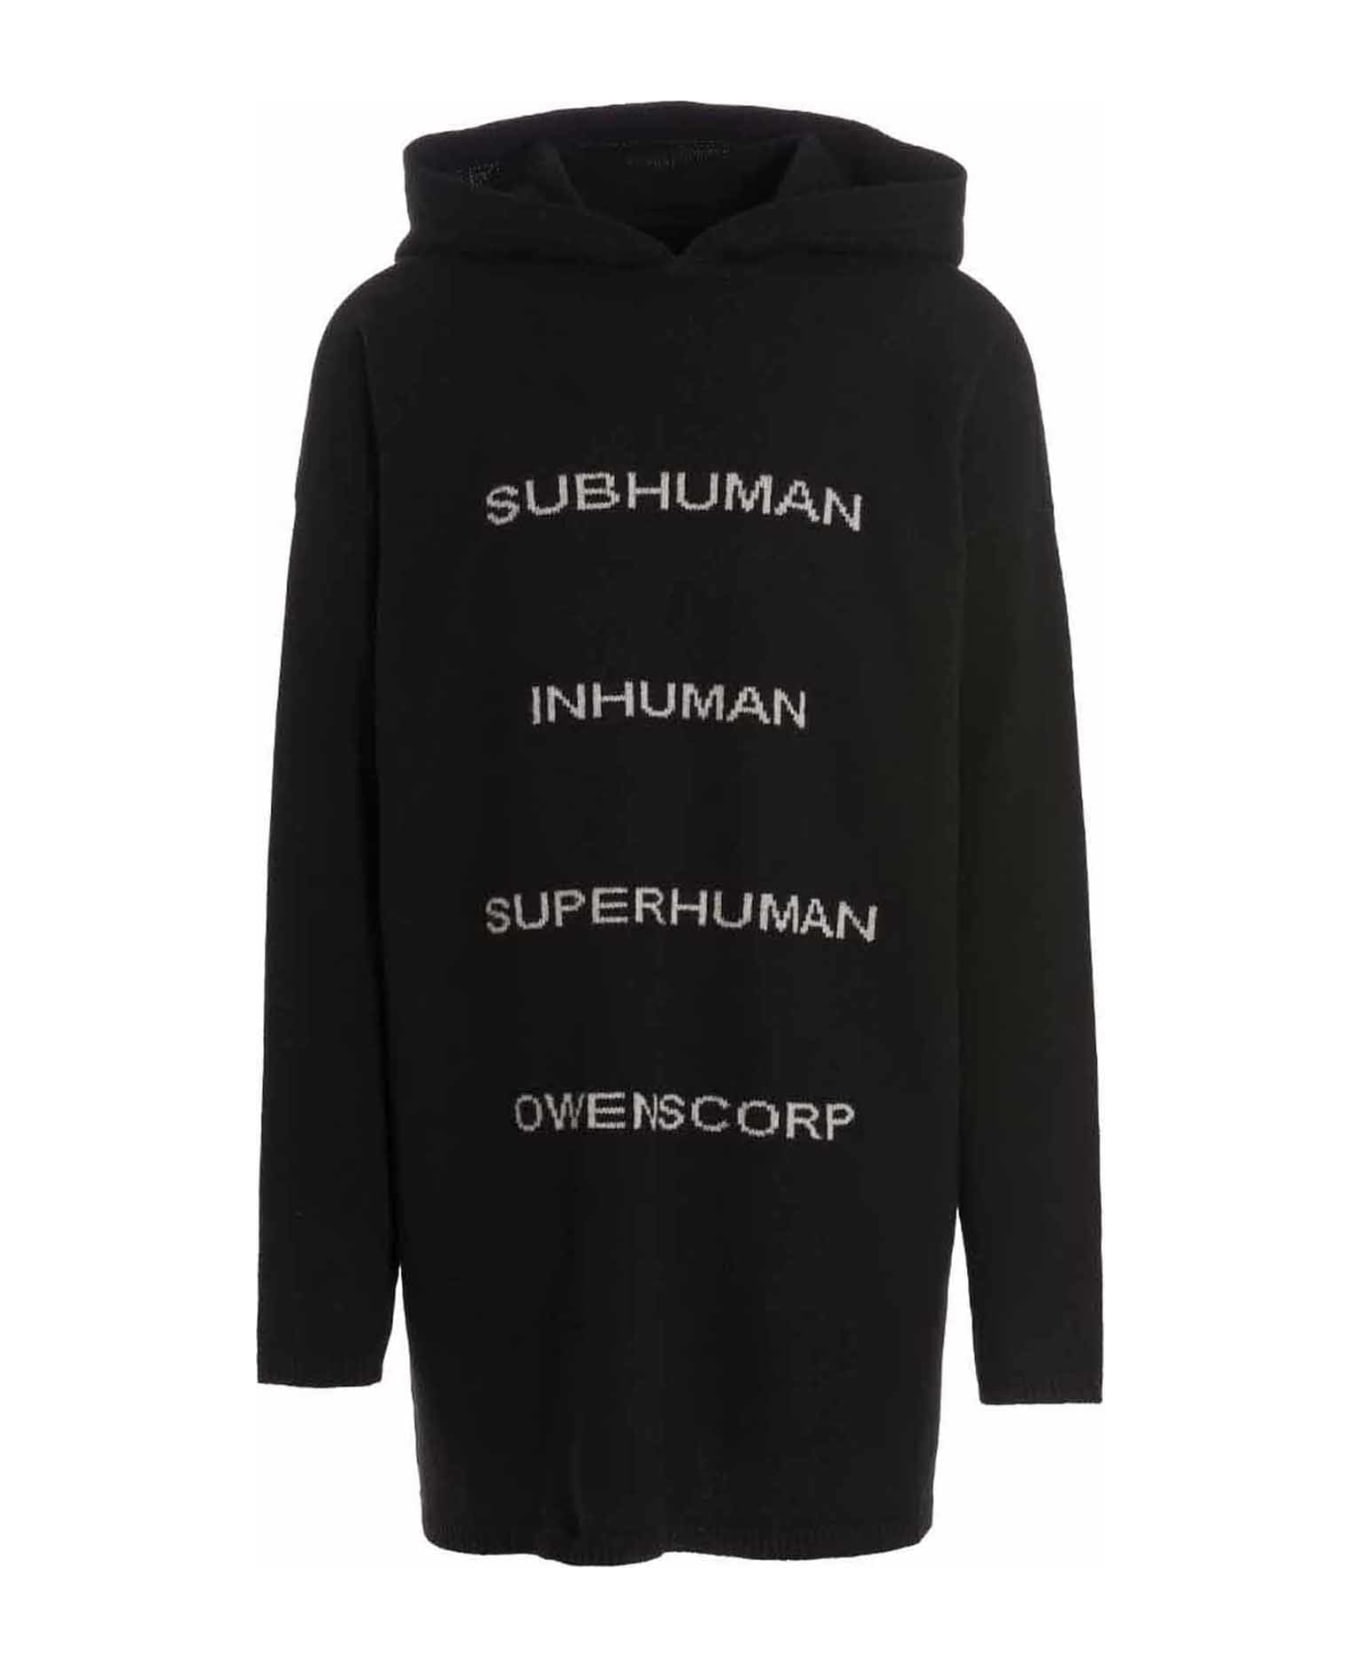 Rick Owens 'tommy' Hooded Sweater